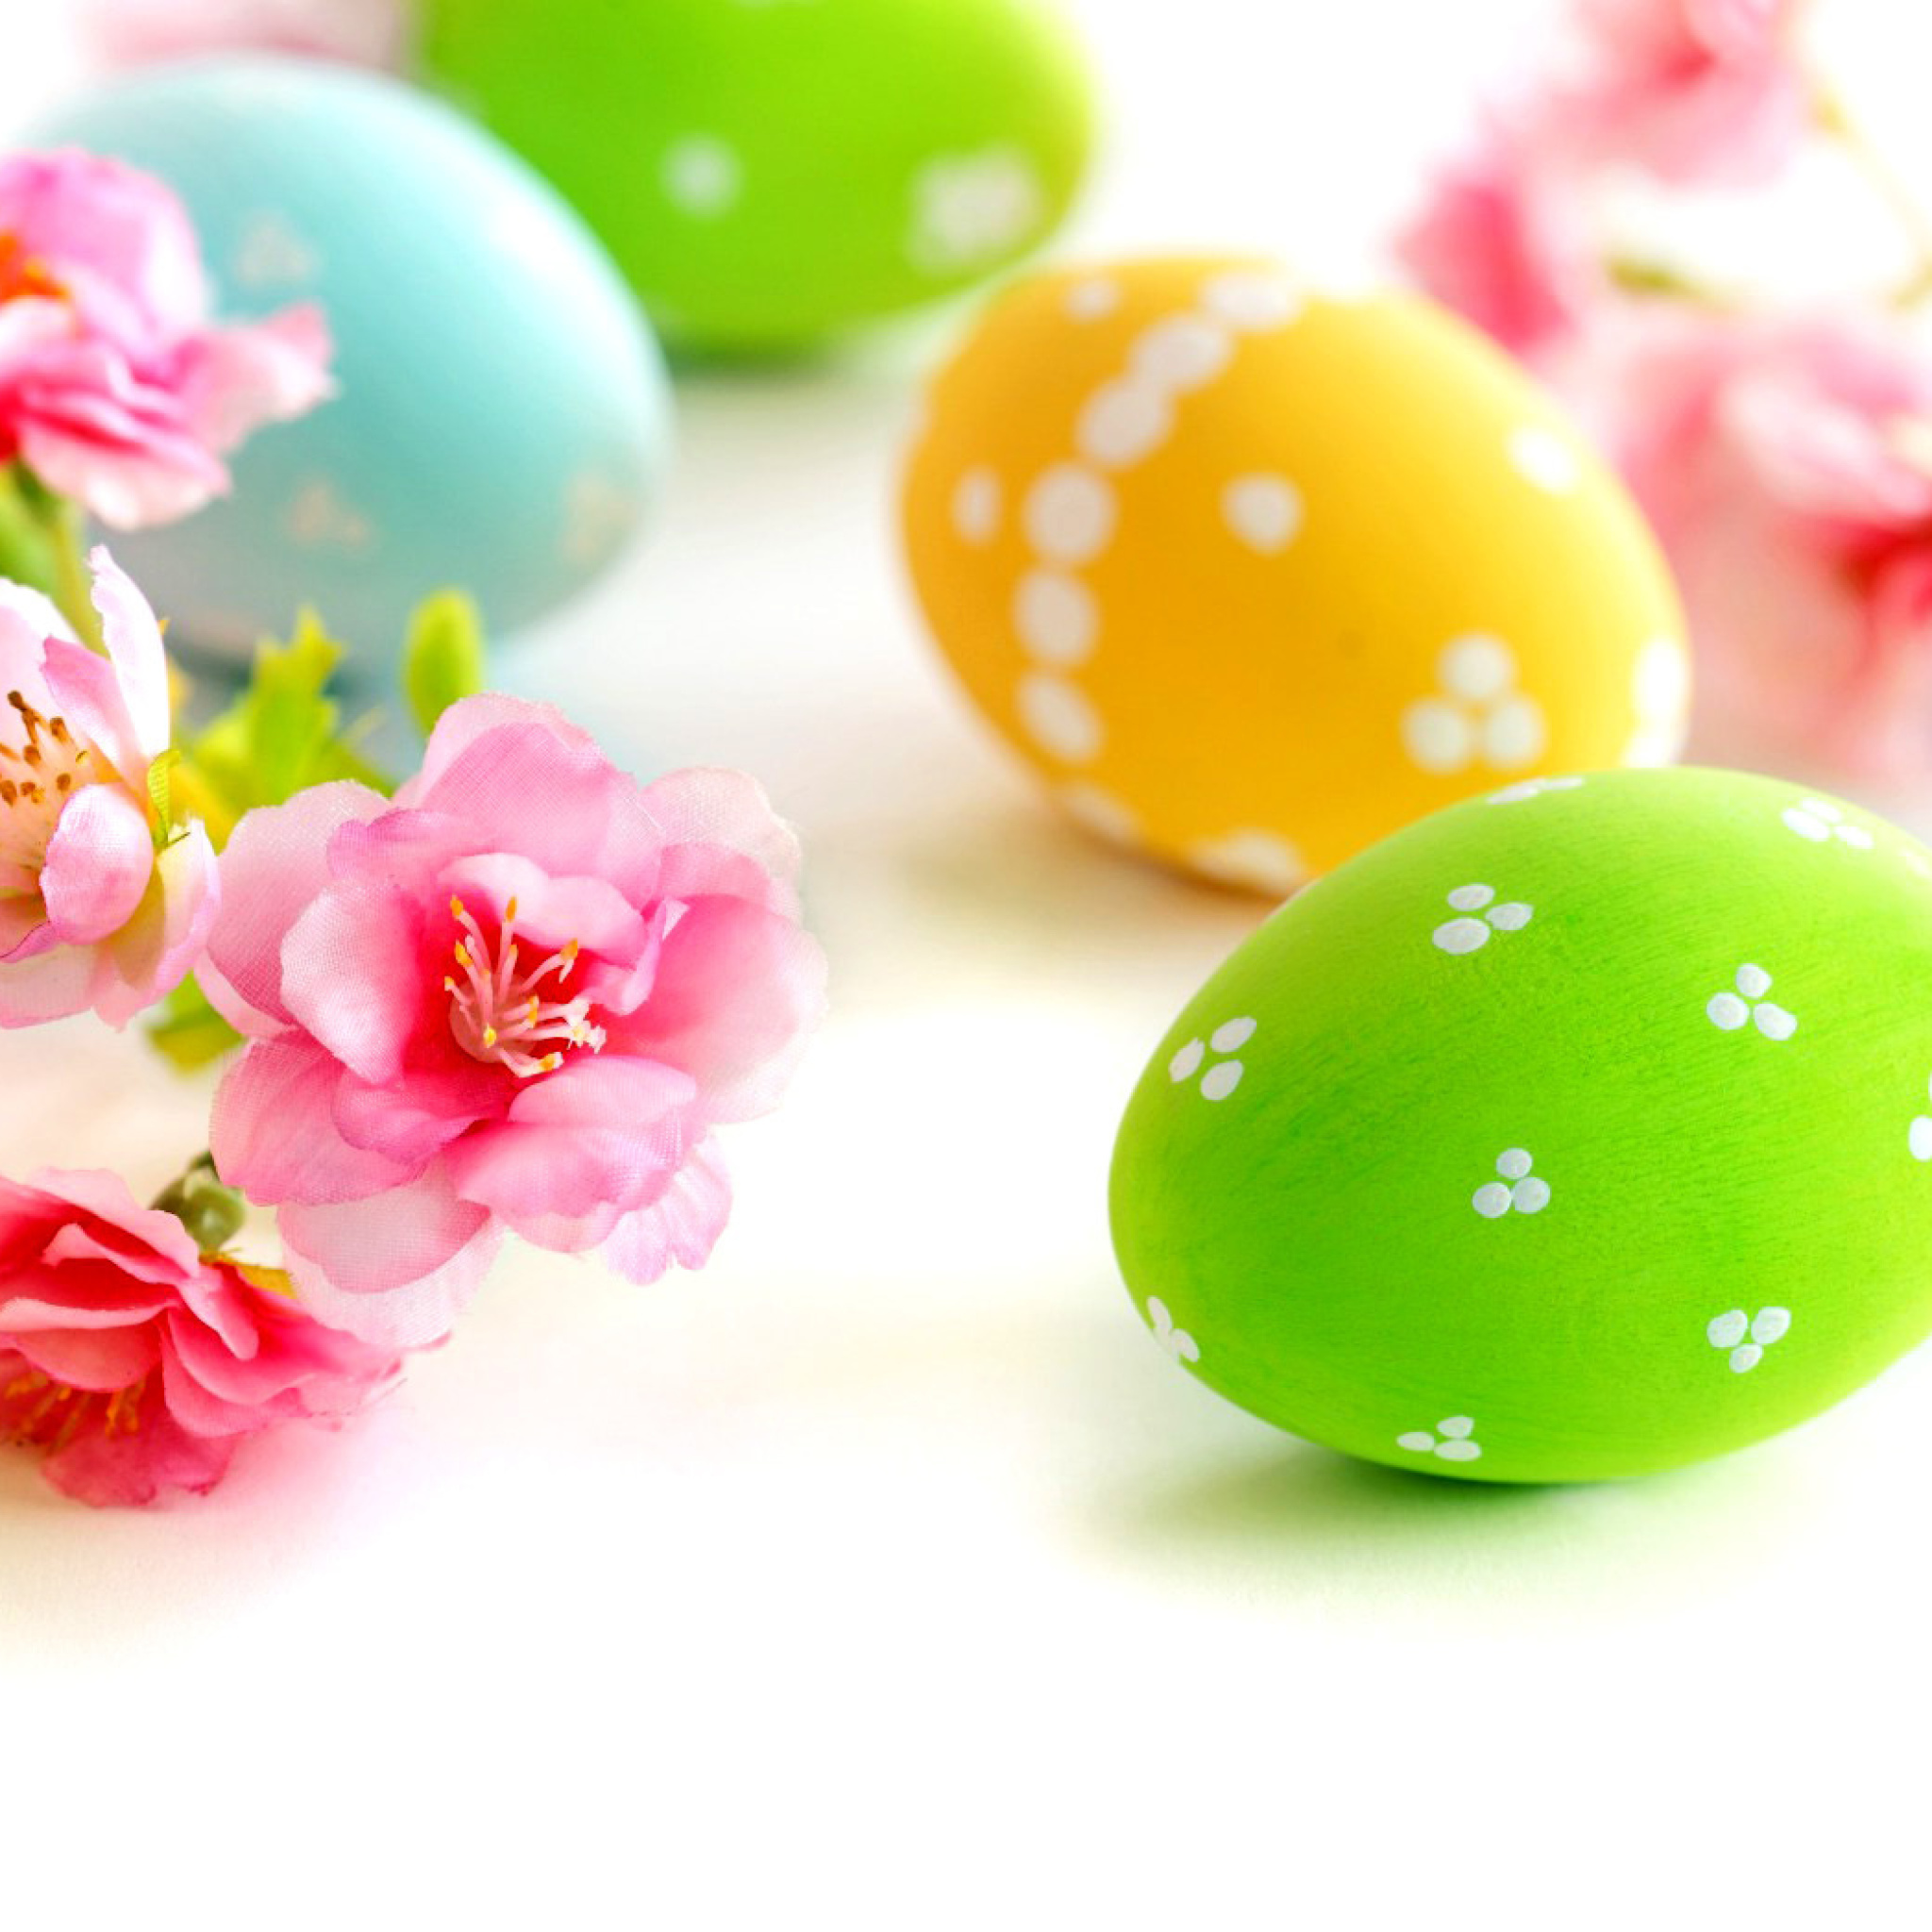 Easter Eggs and Spring Flowers screenshot #1 2048x2048